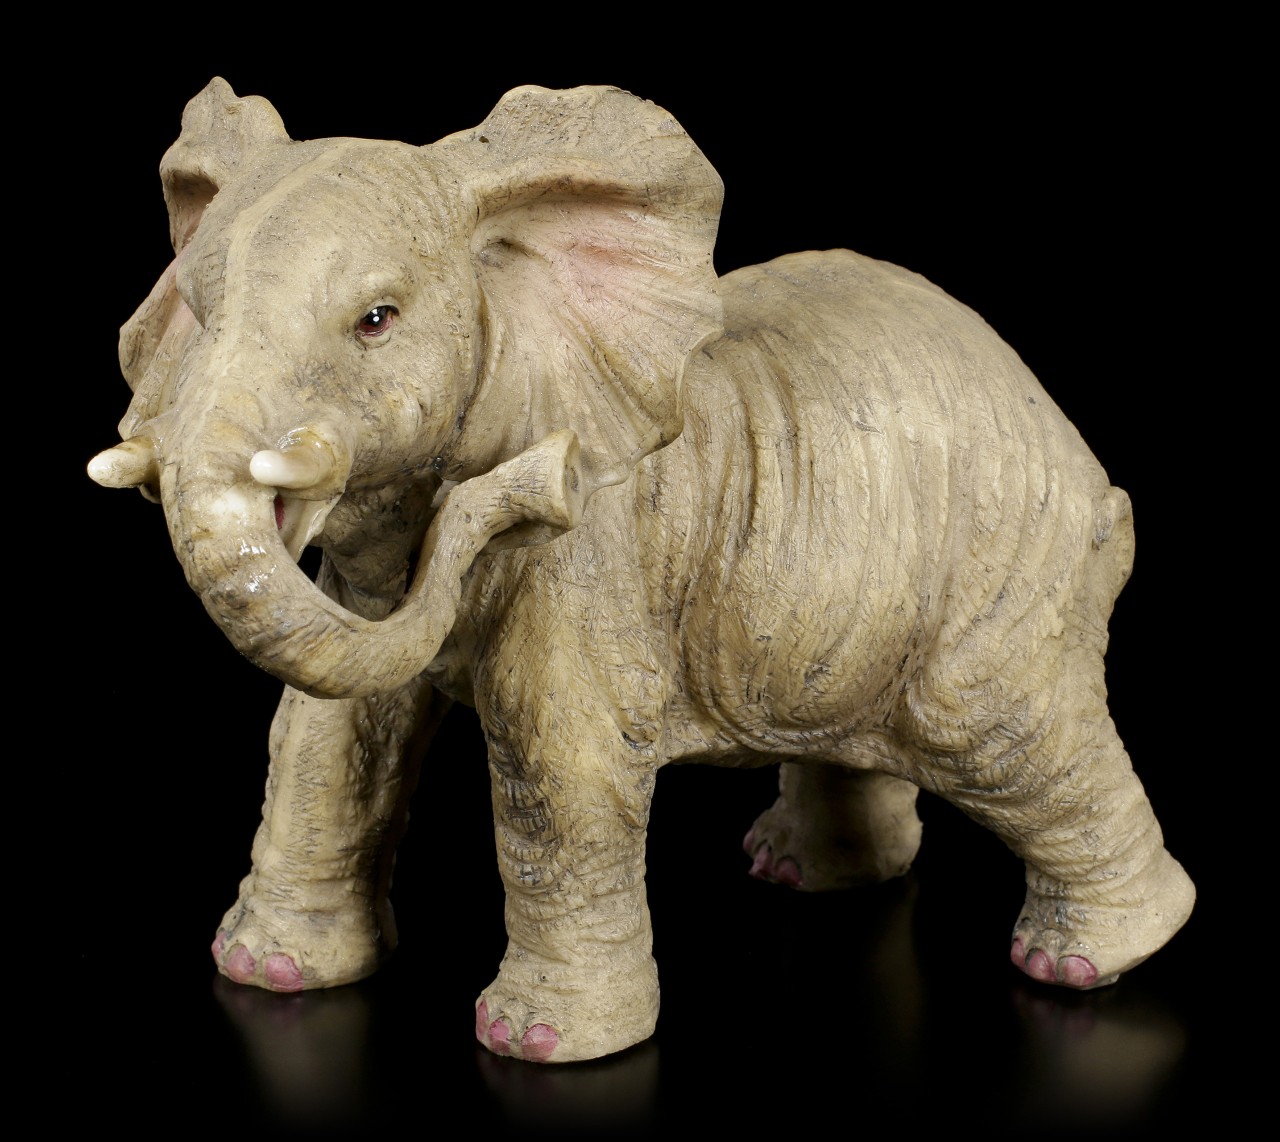 Elephant Figurine - Young with lowered Trunk